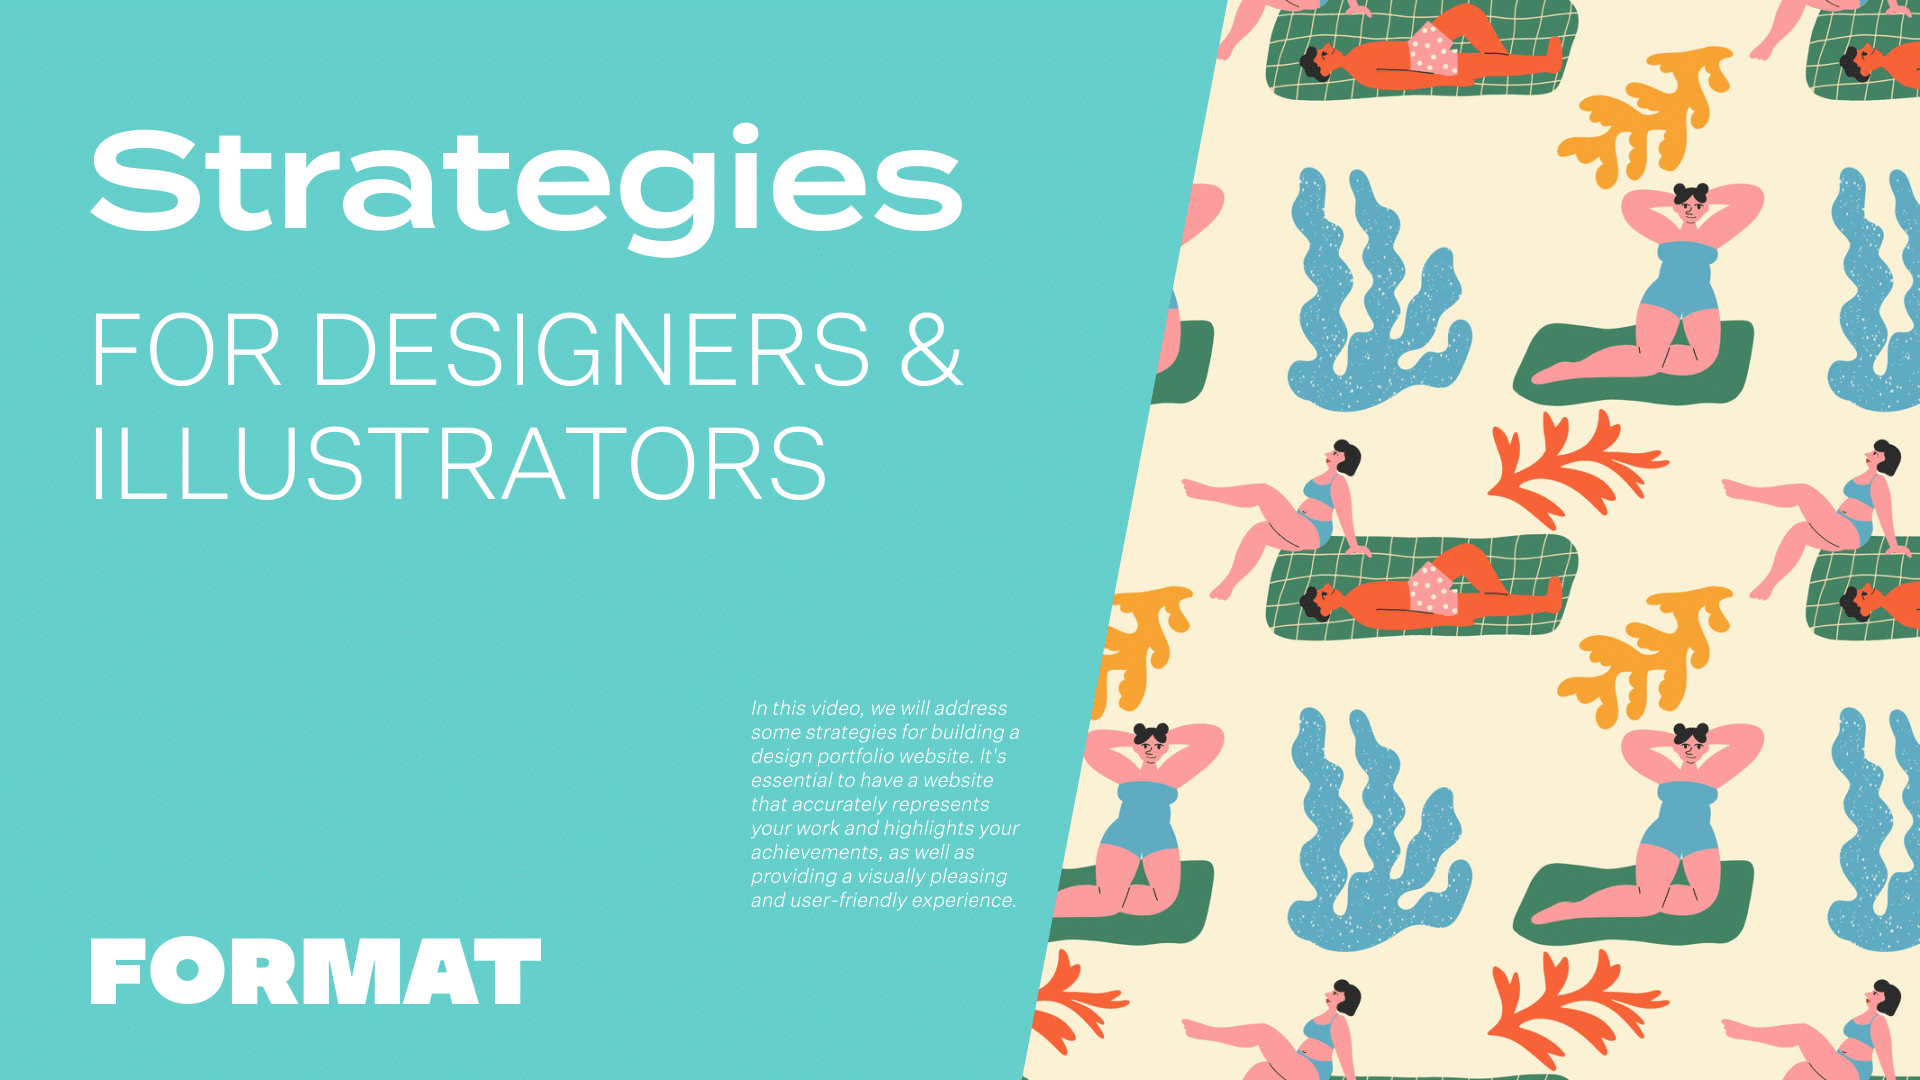 Text in image reads "Strategies for Designers & Illustrators" and shows an illustration of people on the beach